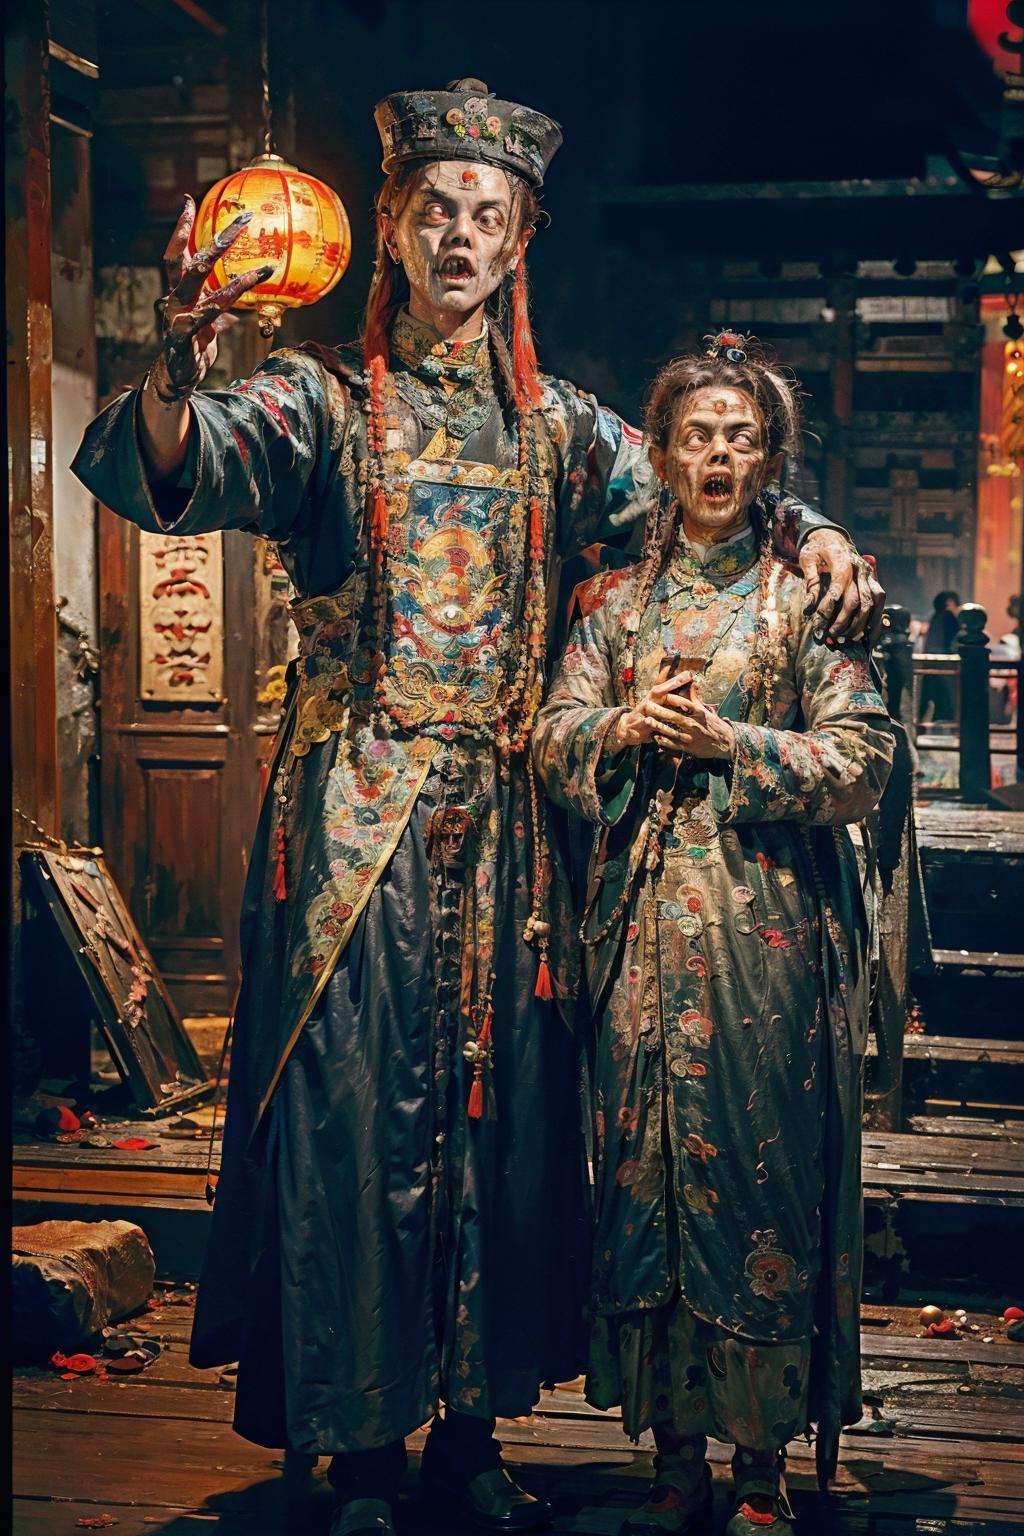 Chinese Qing Zombie - (清代殭屍) image by ssugar008